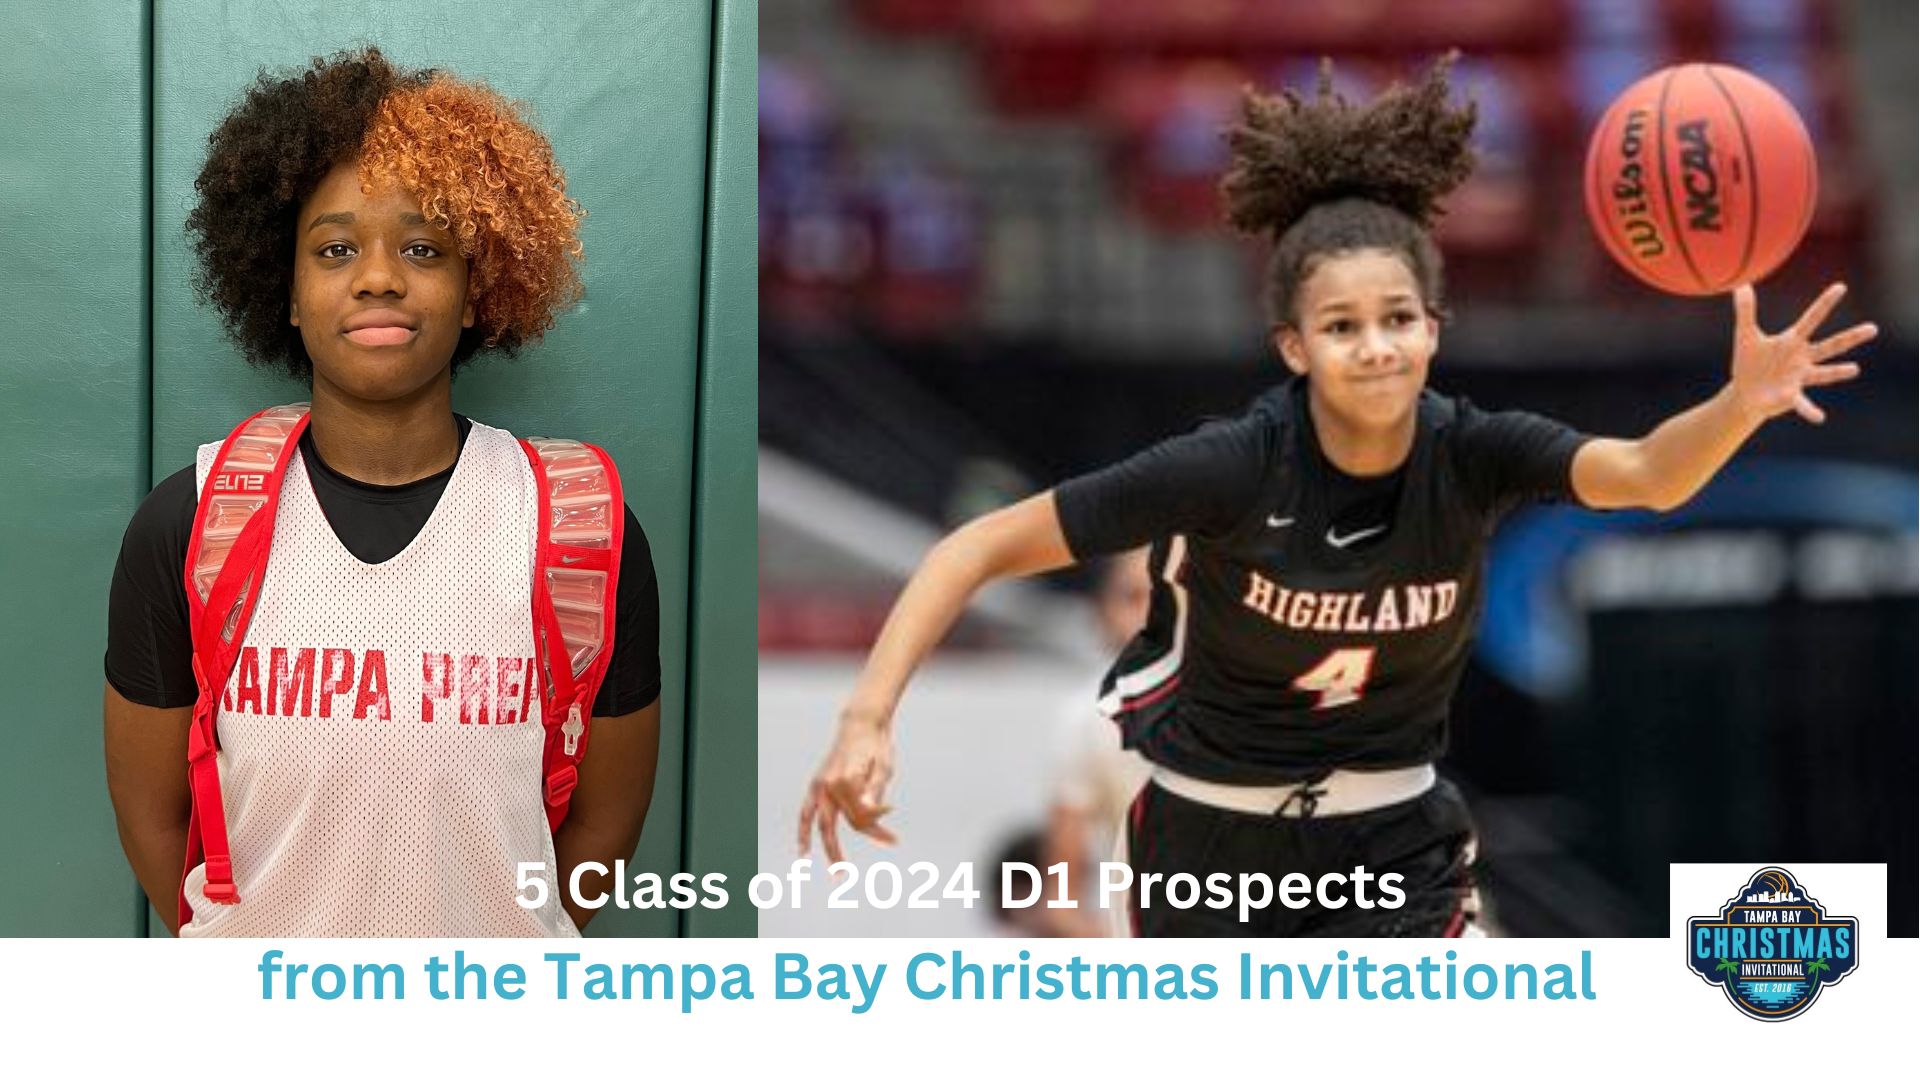 2023 Tampa Bay Christmas Inv'l 5 Class of 2024 D1 Prospects Prep